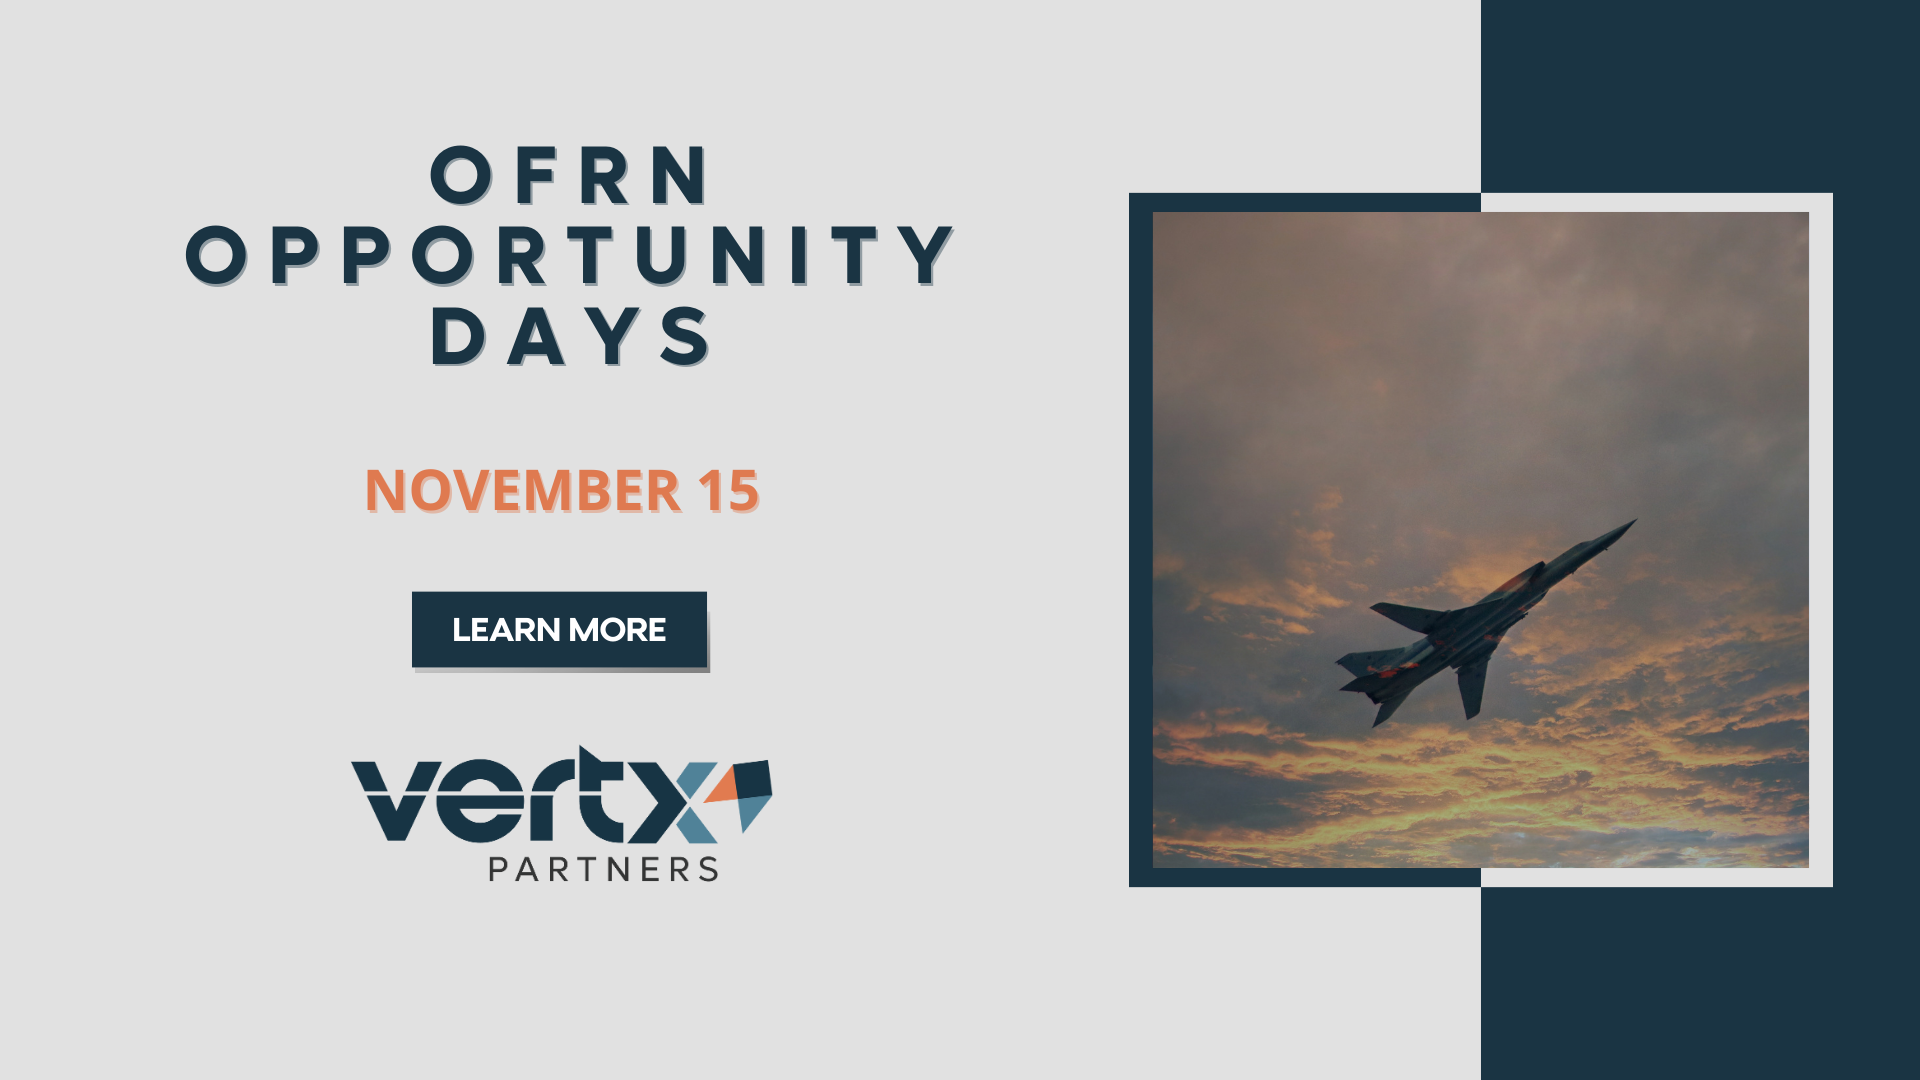 This graphic has the title OFRN Opportunity Days with the date November 15th under it and a photo of a fighter jet in the sky with a sunset in the background to the right of the title.